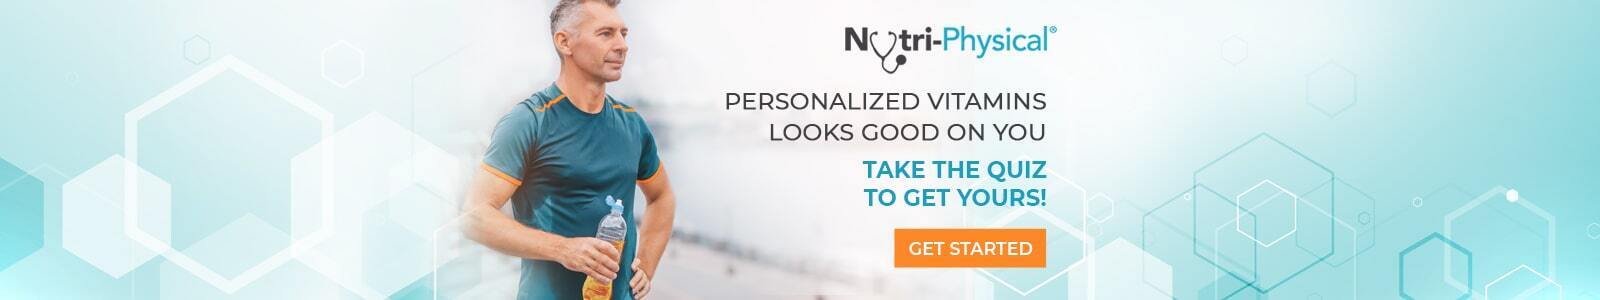 Nutri-Physical. Personalized Vitamins. Looks good on you. Take the quiz to get yours.